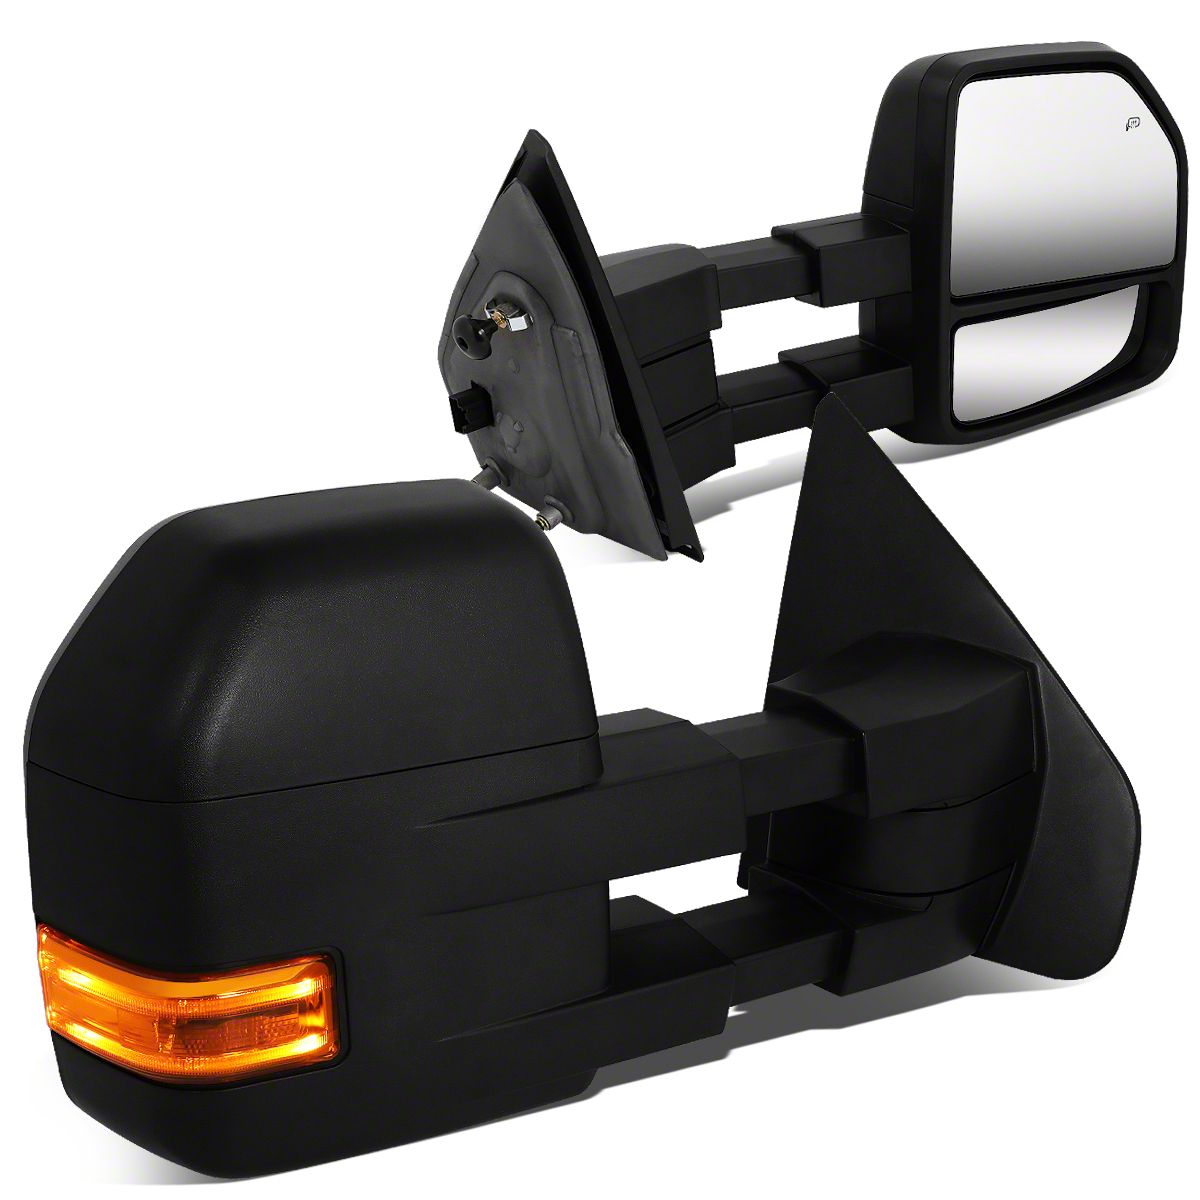 AERDM F150 Towing Mirrors fit 2015-2018 with Auxiliary/Puddle Lights Signal Indicator and Linear arrow light Power Operation Heated Black Housing with 22pin to 8pin adapter